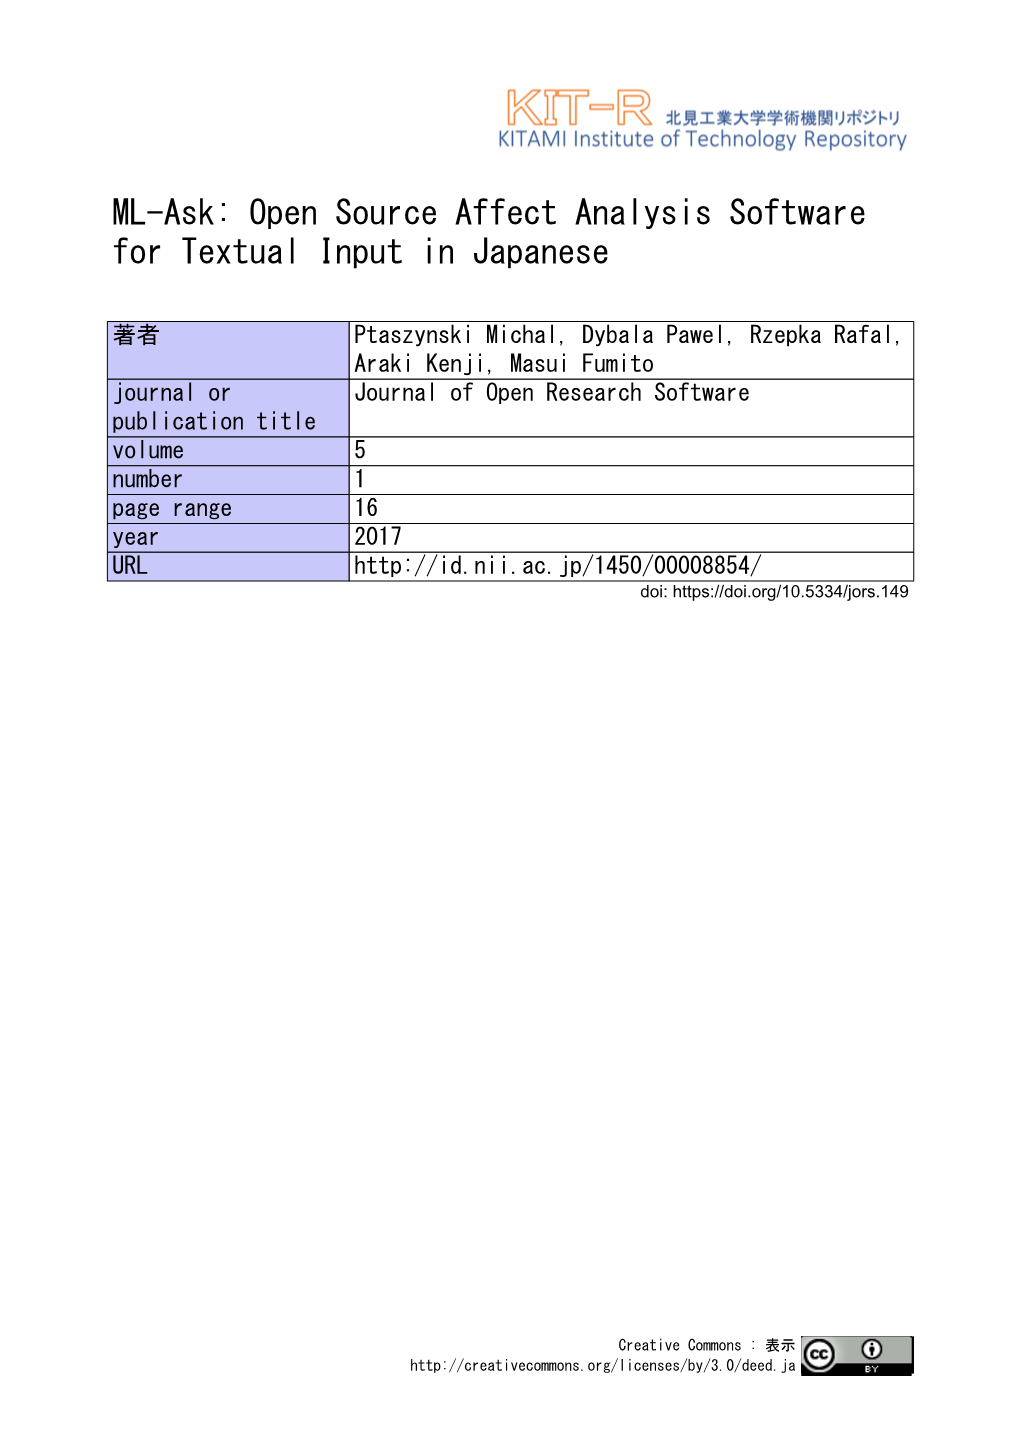 ML-Ask: Open Source Affect Analysis Software for Textual Input in Japanese